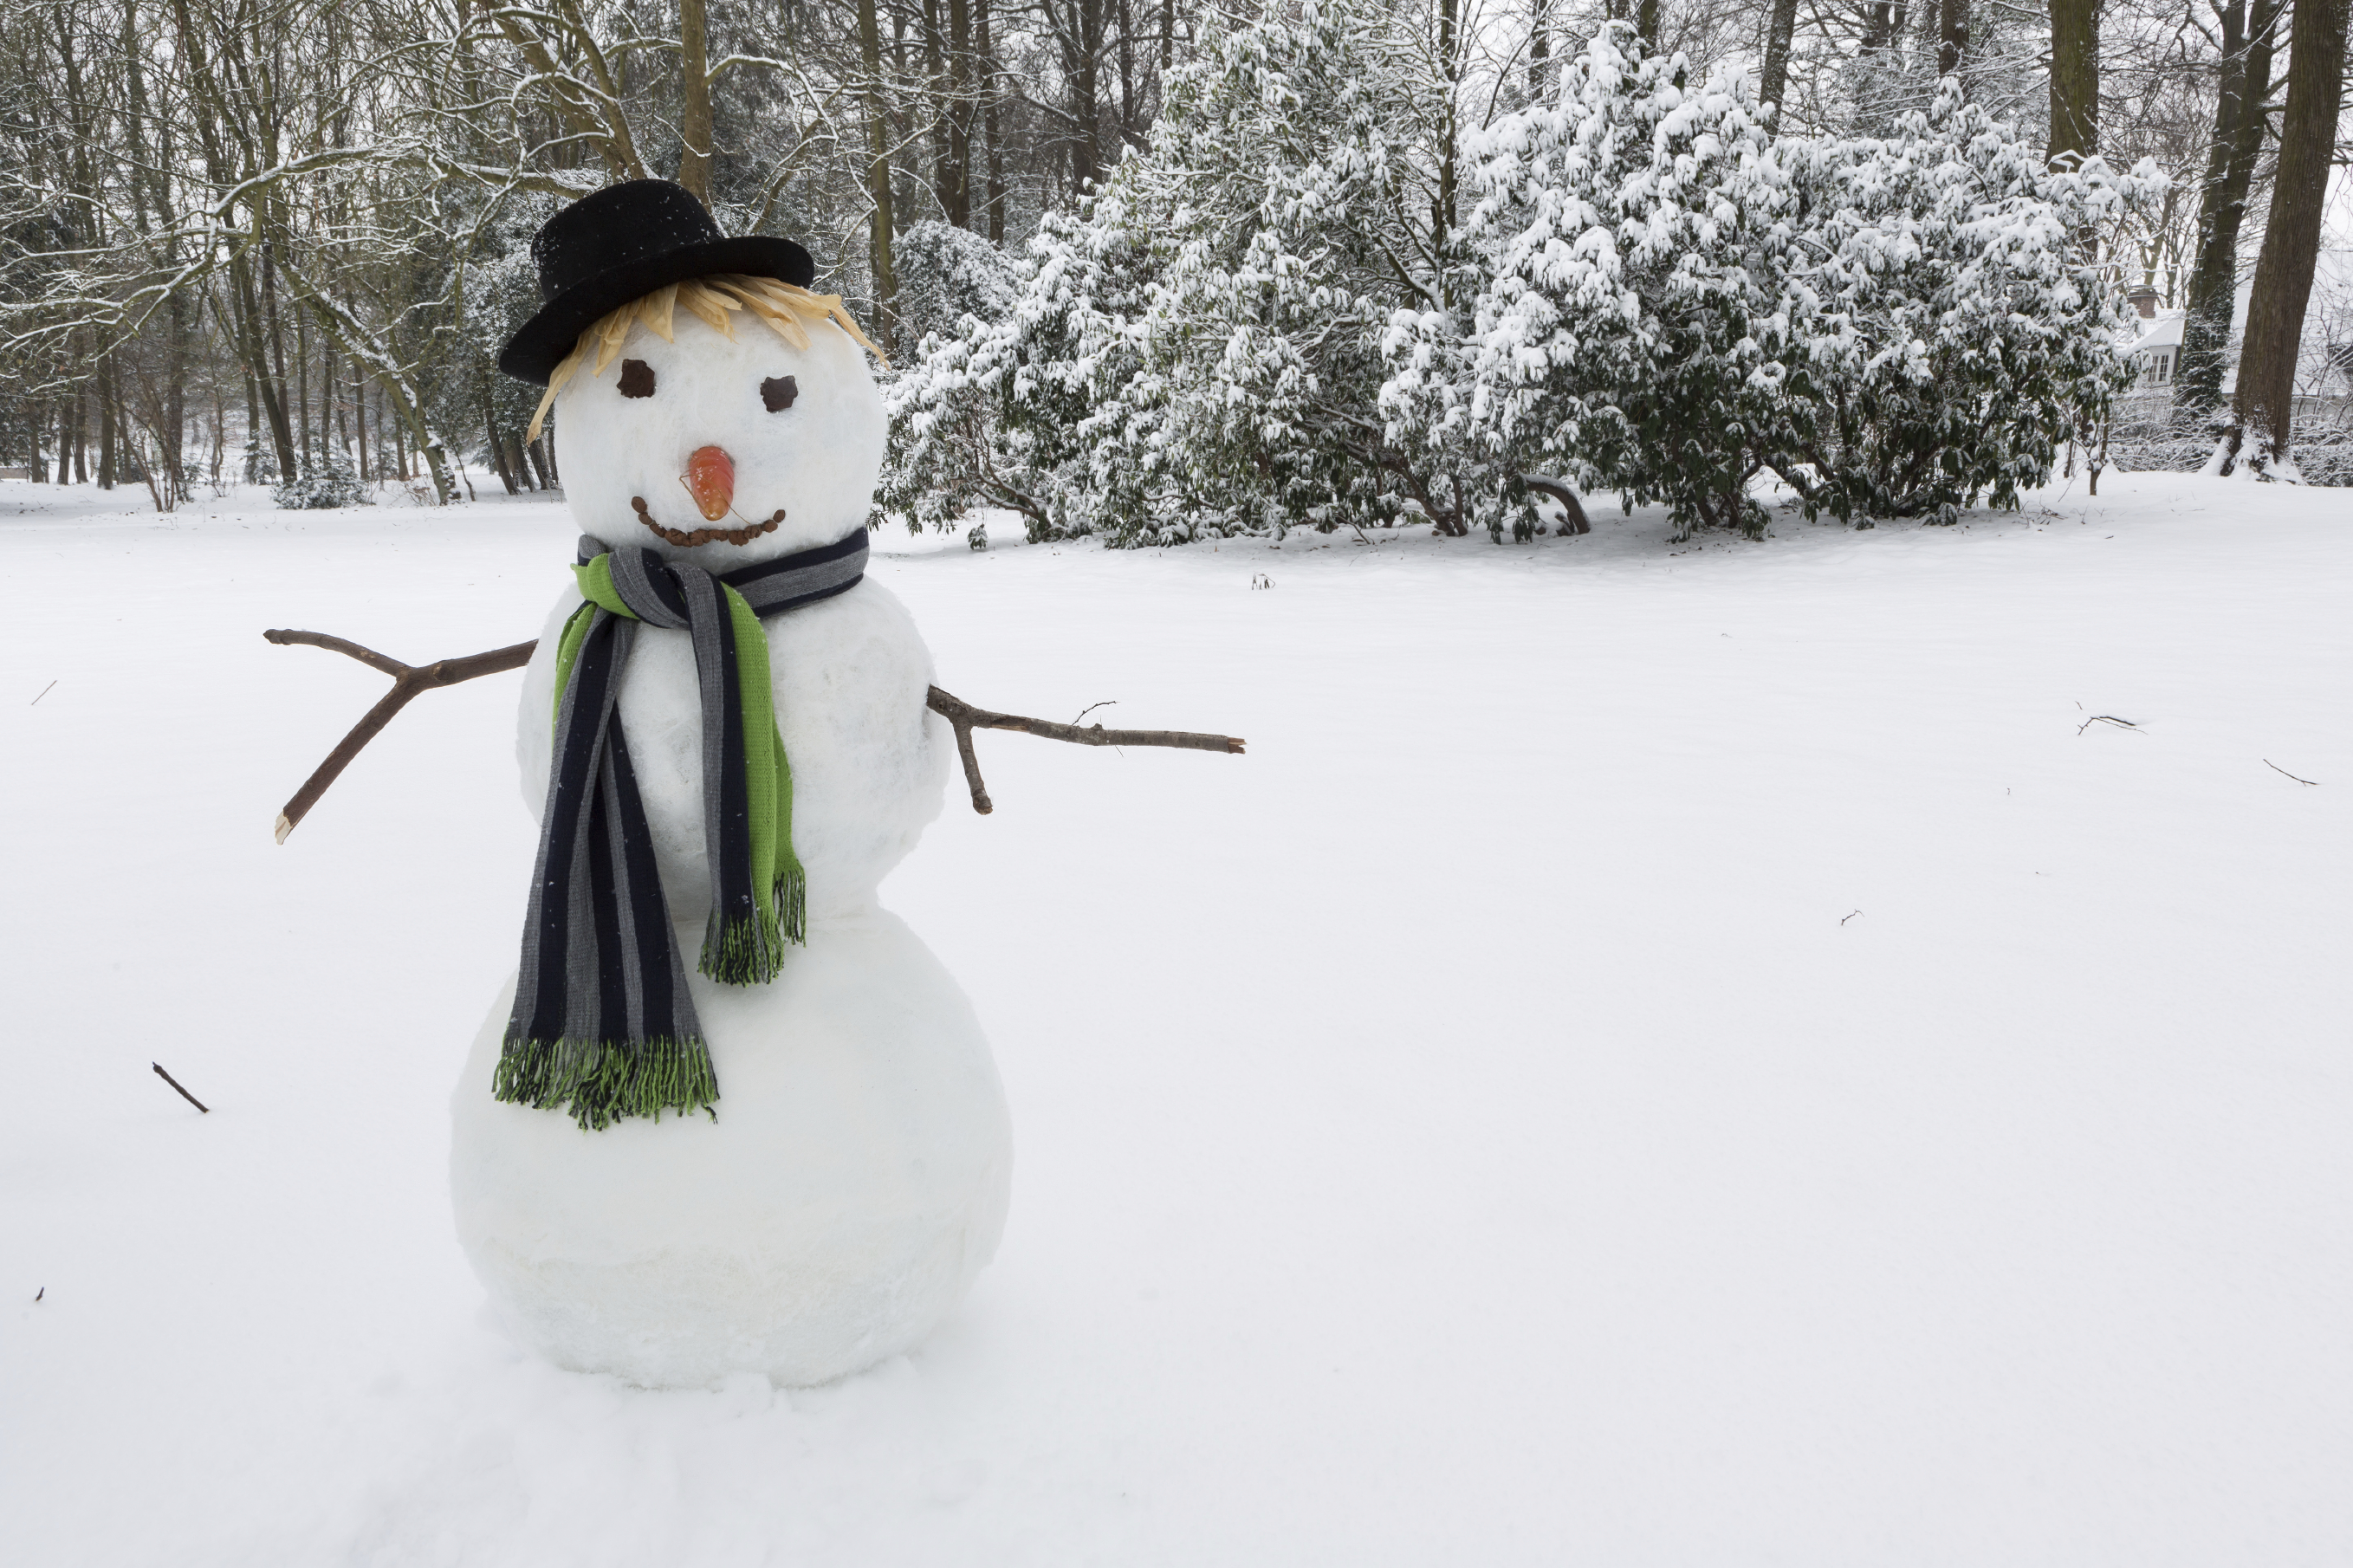 Montgomery Parks Launches Snowman Contest | Montgomery Community Media